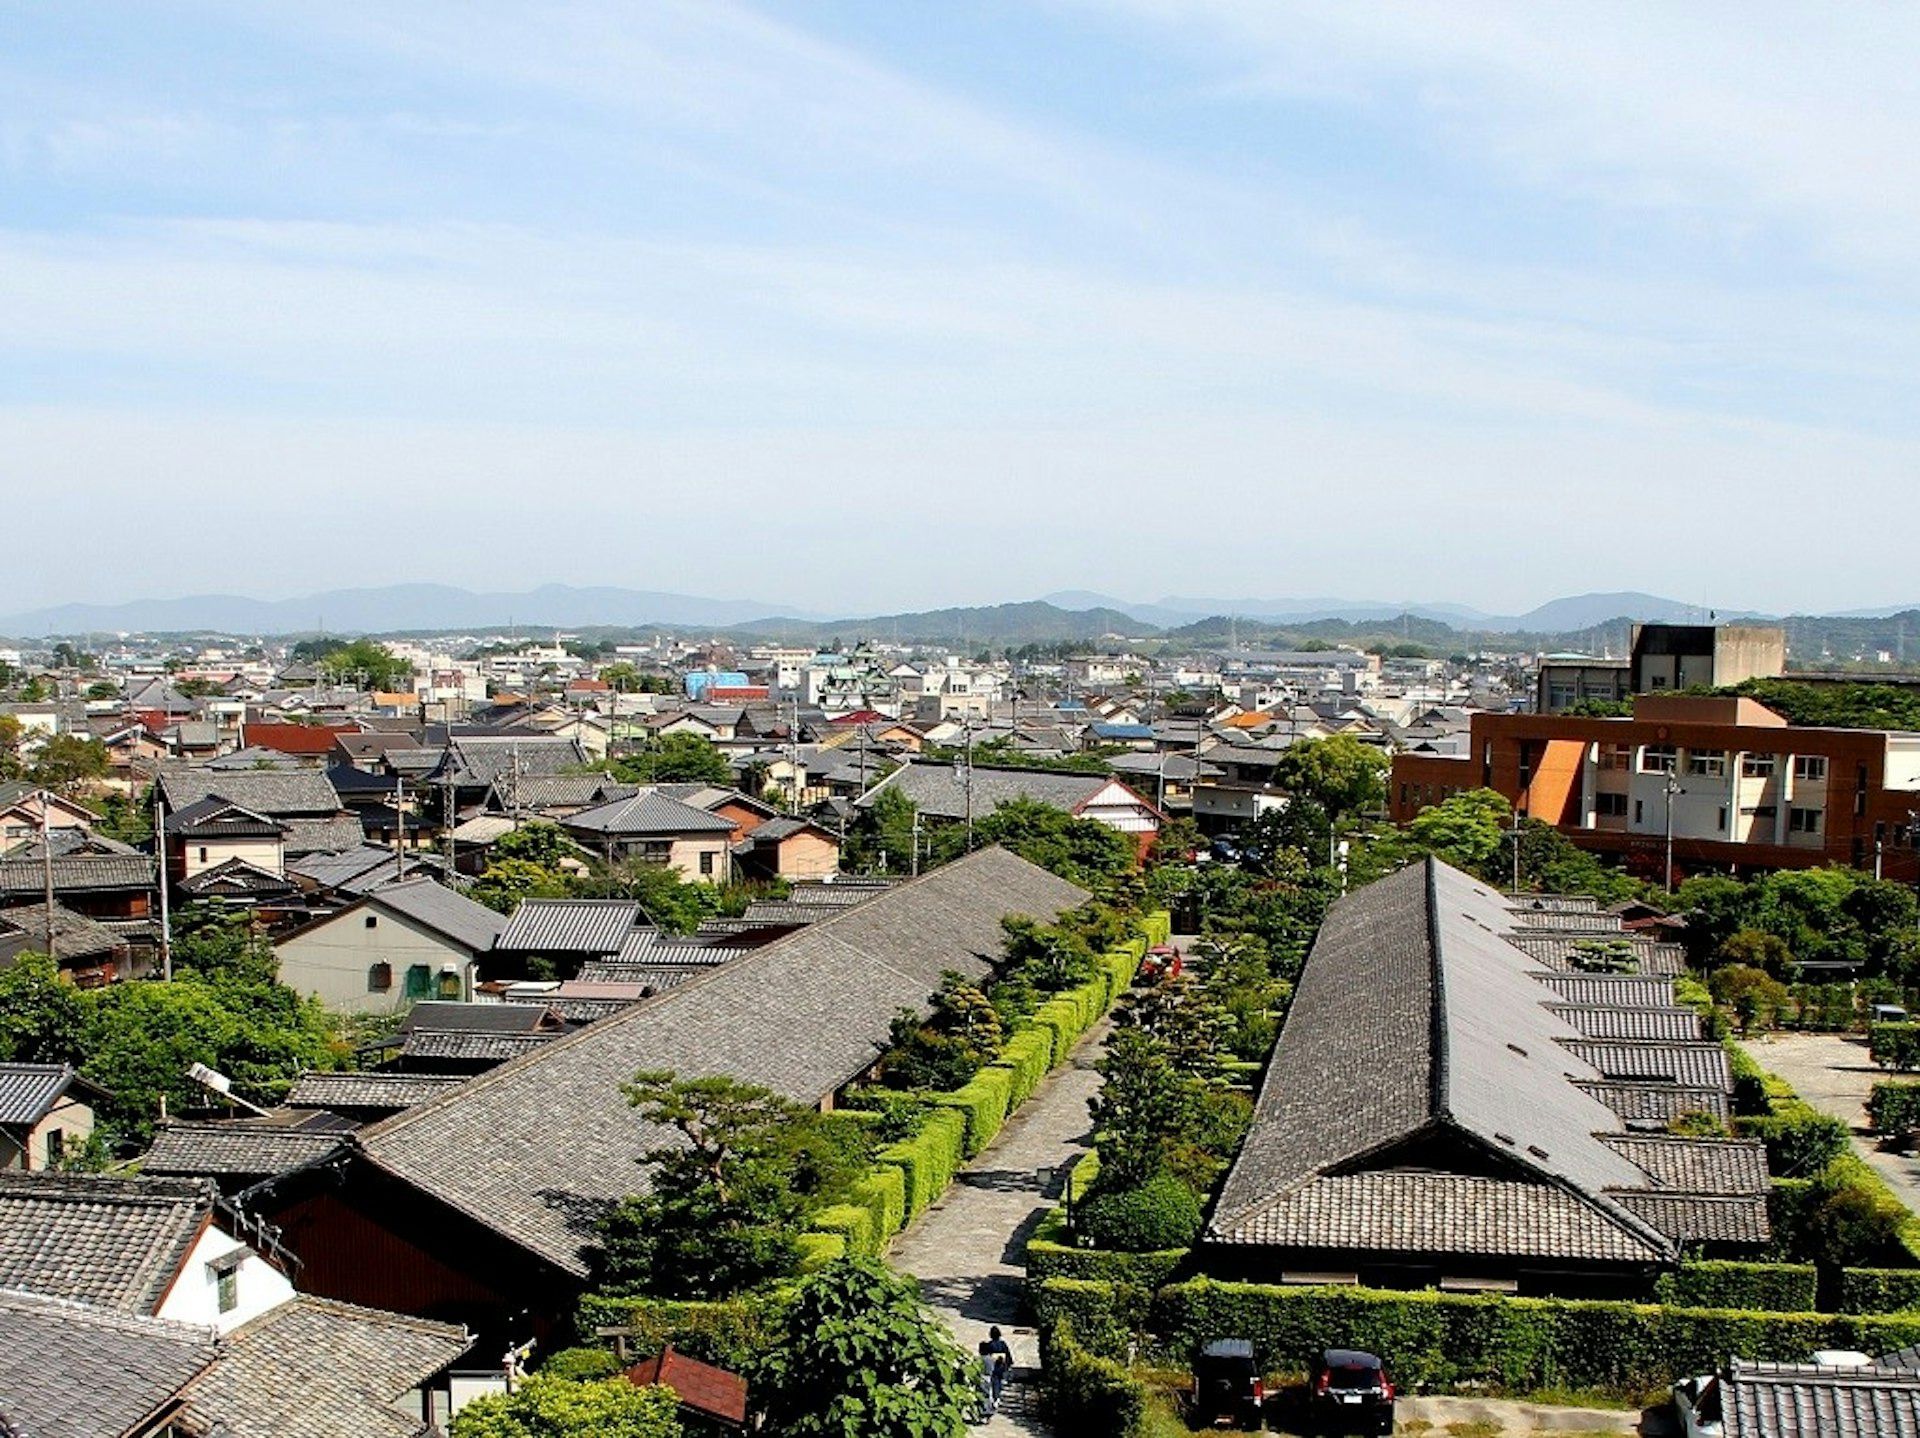 View over Matsusaka from the castle ruins